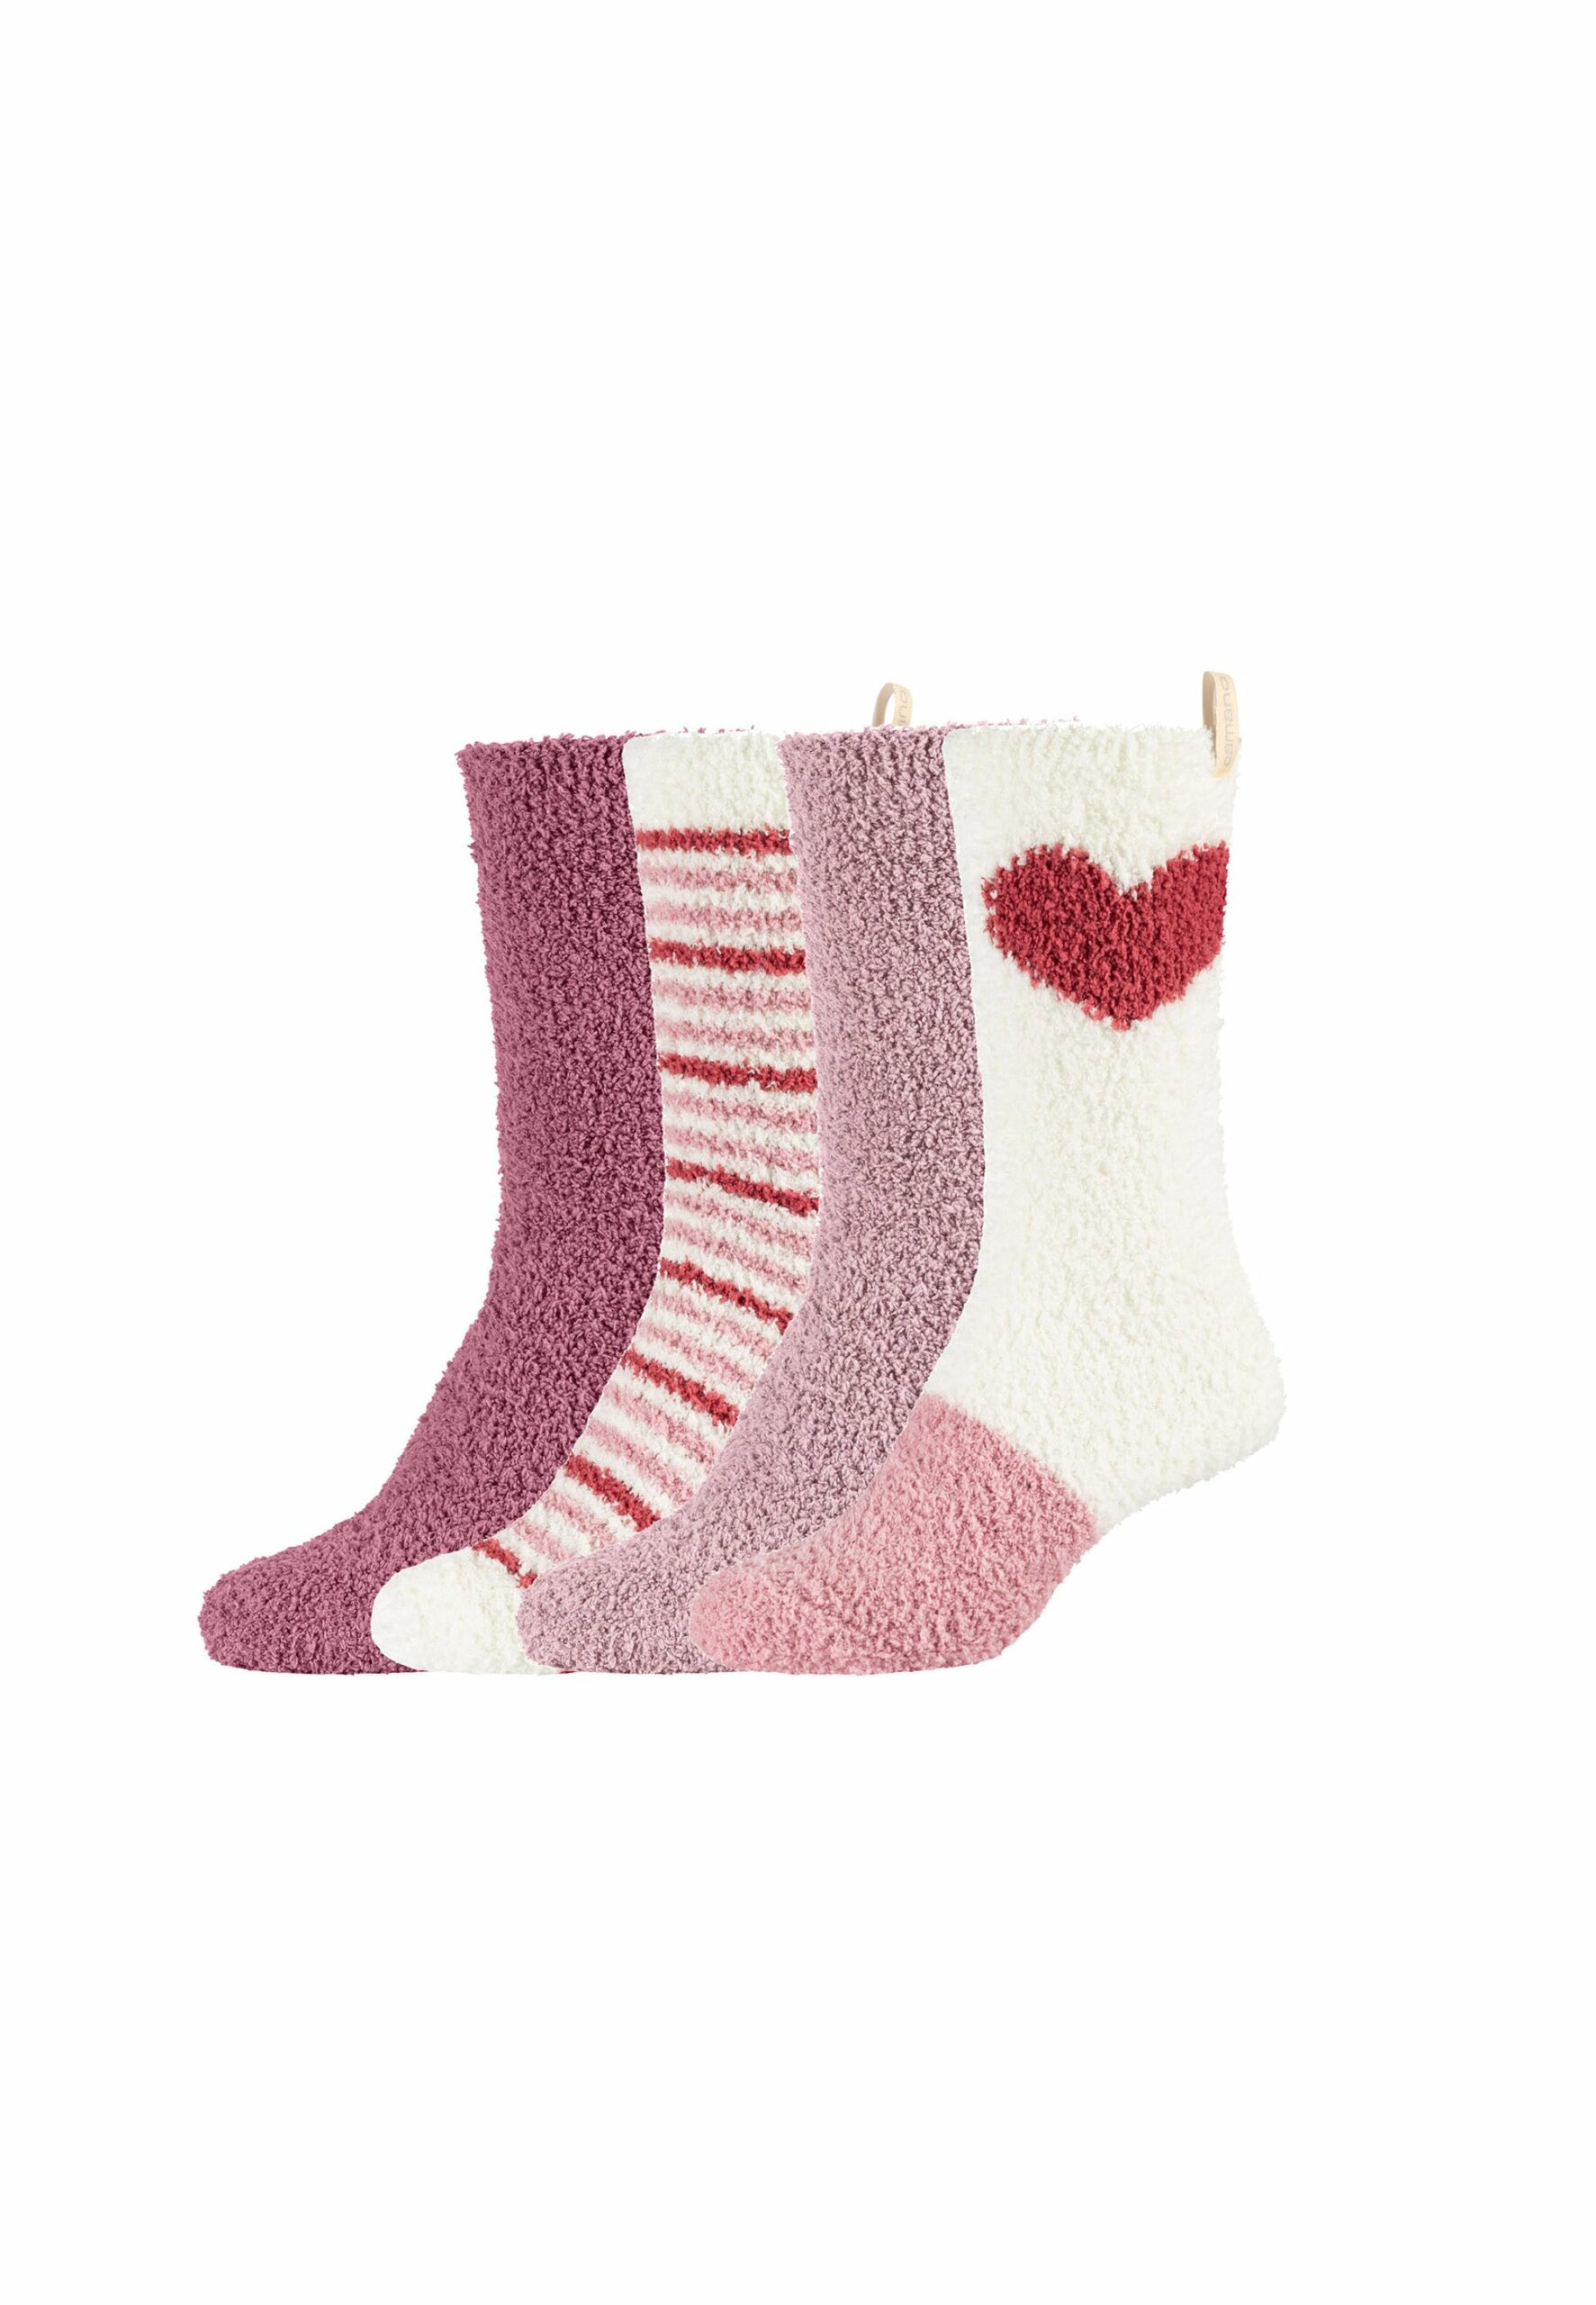 CAMANO Socken sustainable cosy in Box 4er Pack dusty rose